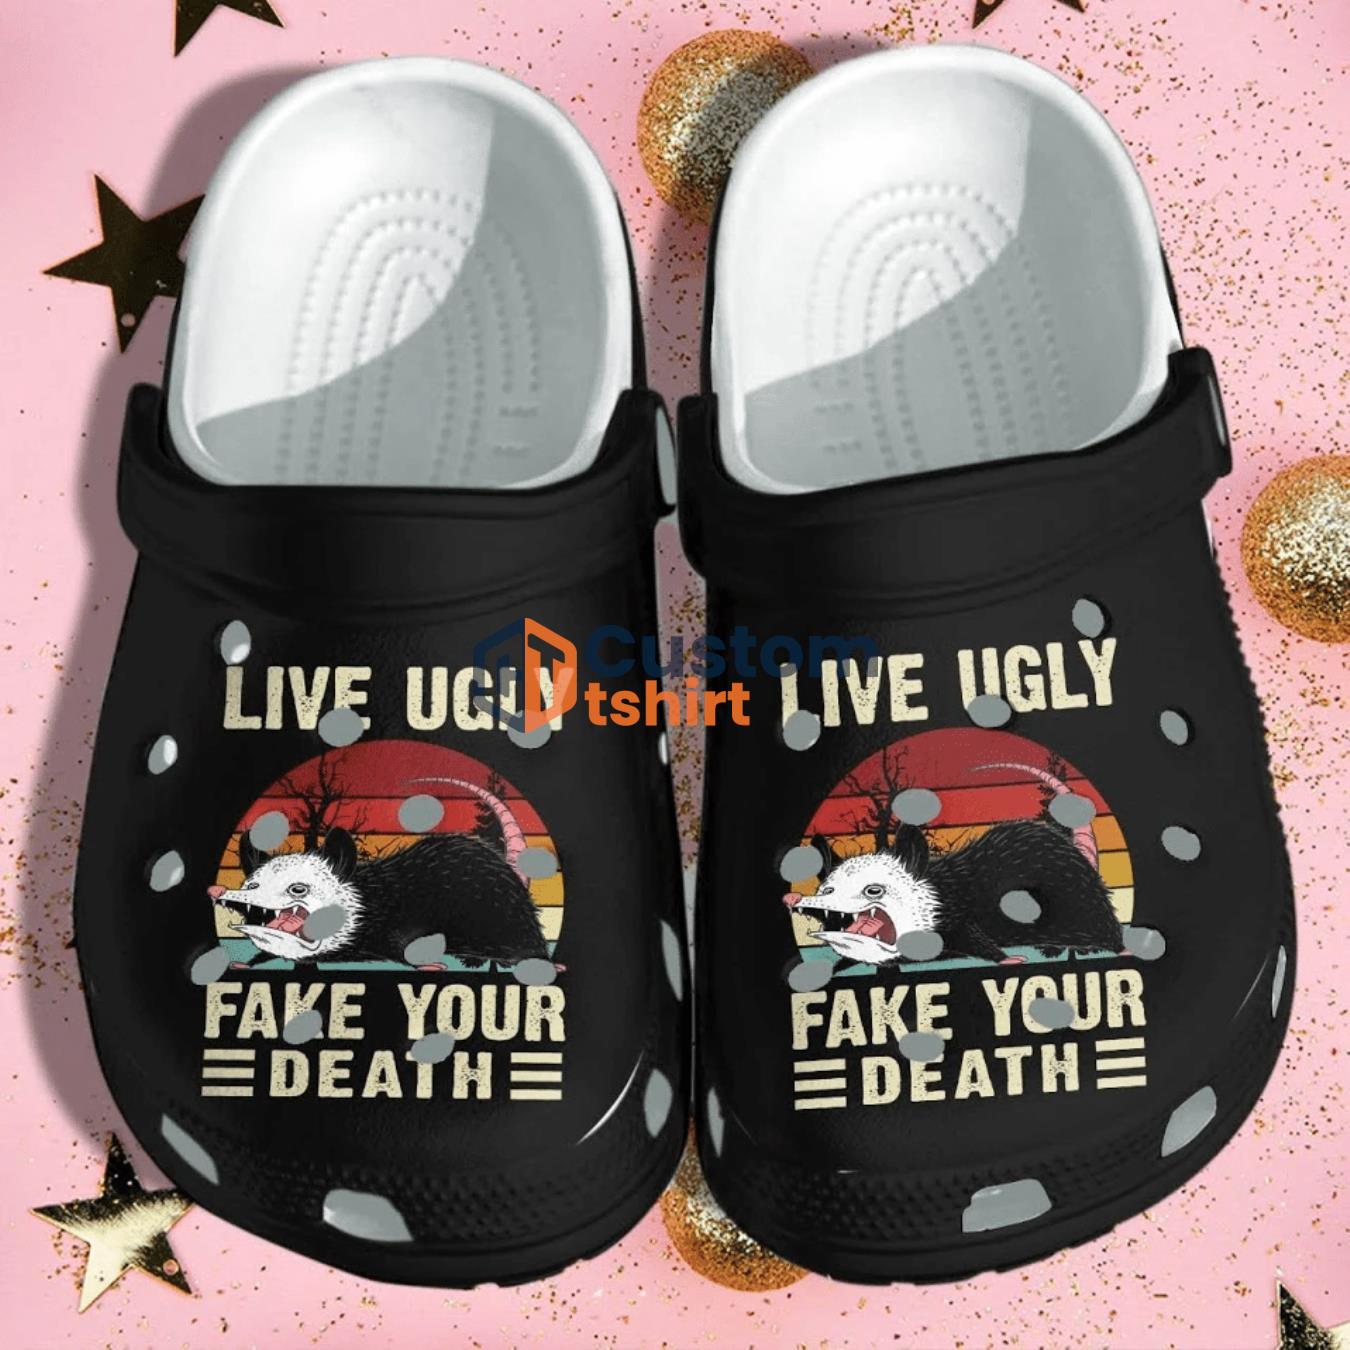 Opossum Funny Live Ugly Clog Shoes - Opossum Vintage Clog Shoes Gifts For Son Men Product Photo 1 Product photo 1